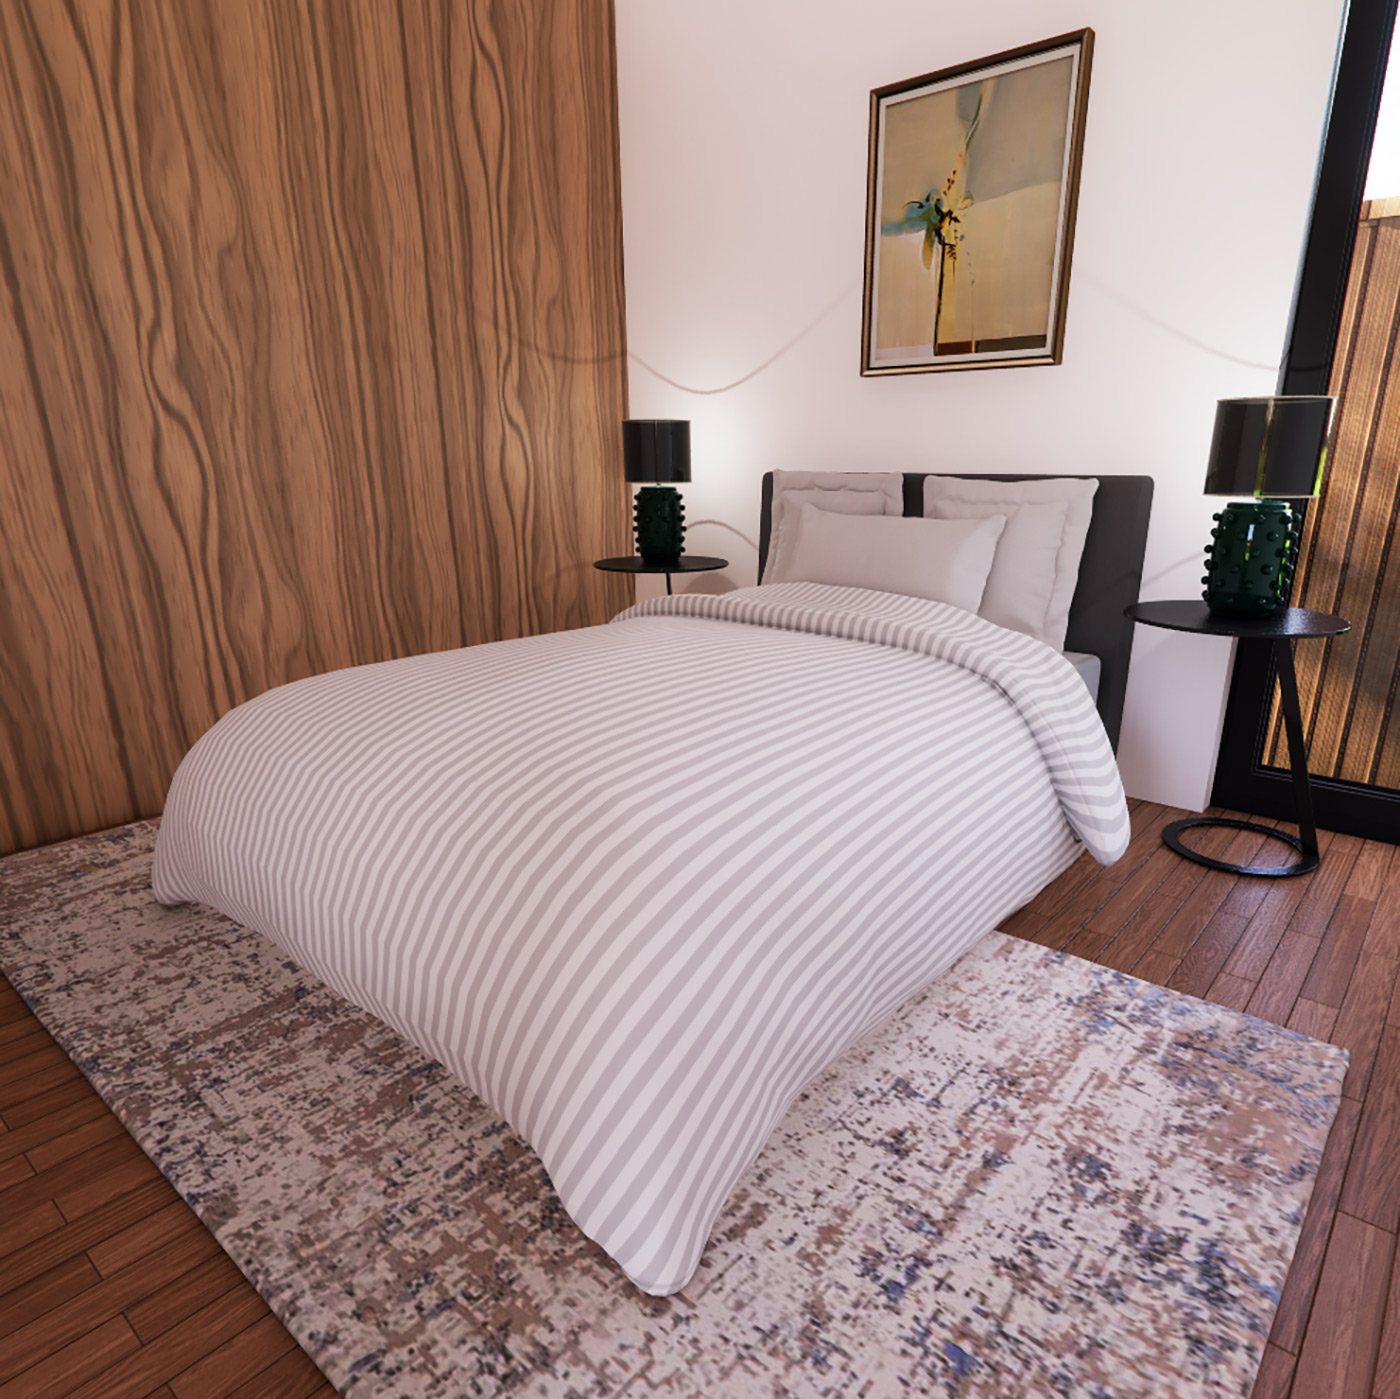 Bedroom area visualisation inside 6.2m by 8.6m mobile home